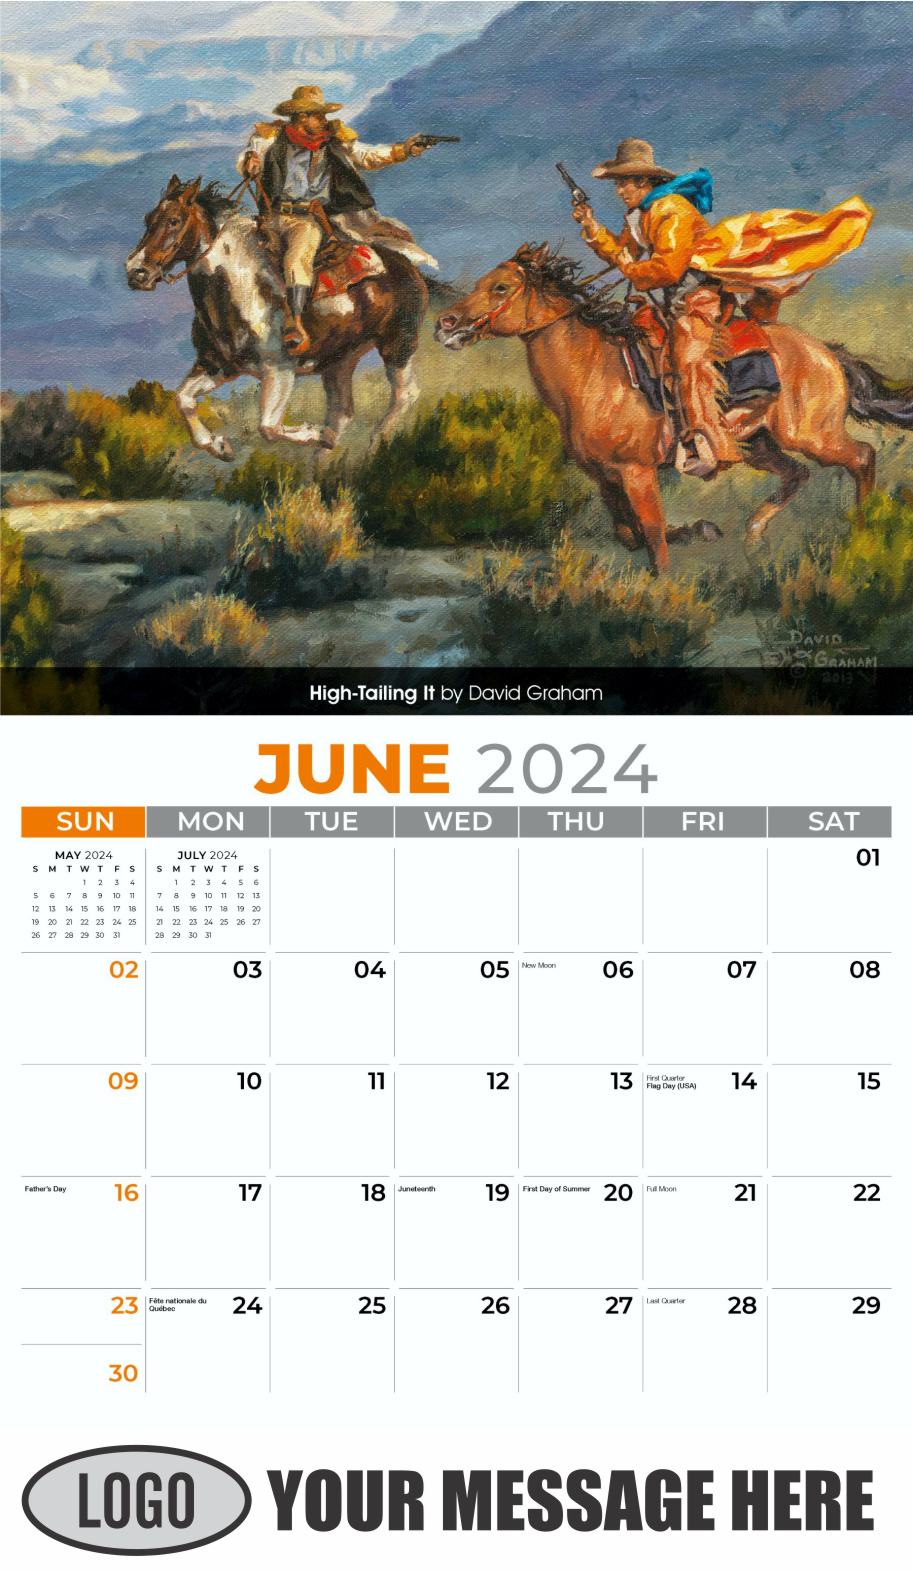 Spirit of the Old West 2024 Old West Art Business Promo Wall Calendar - June